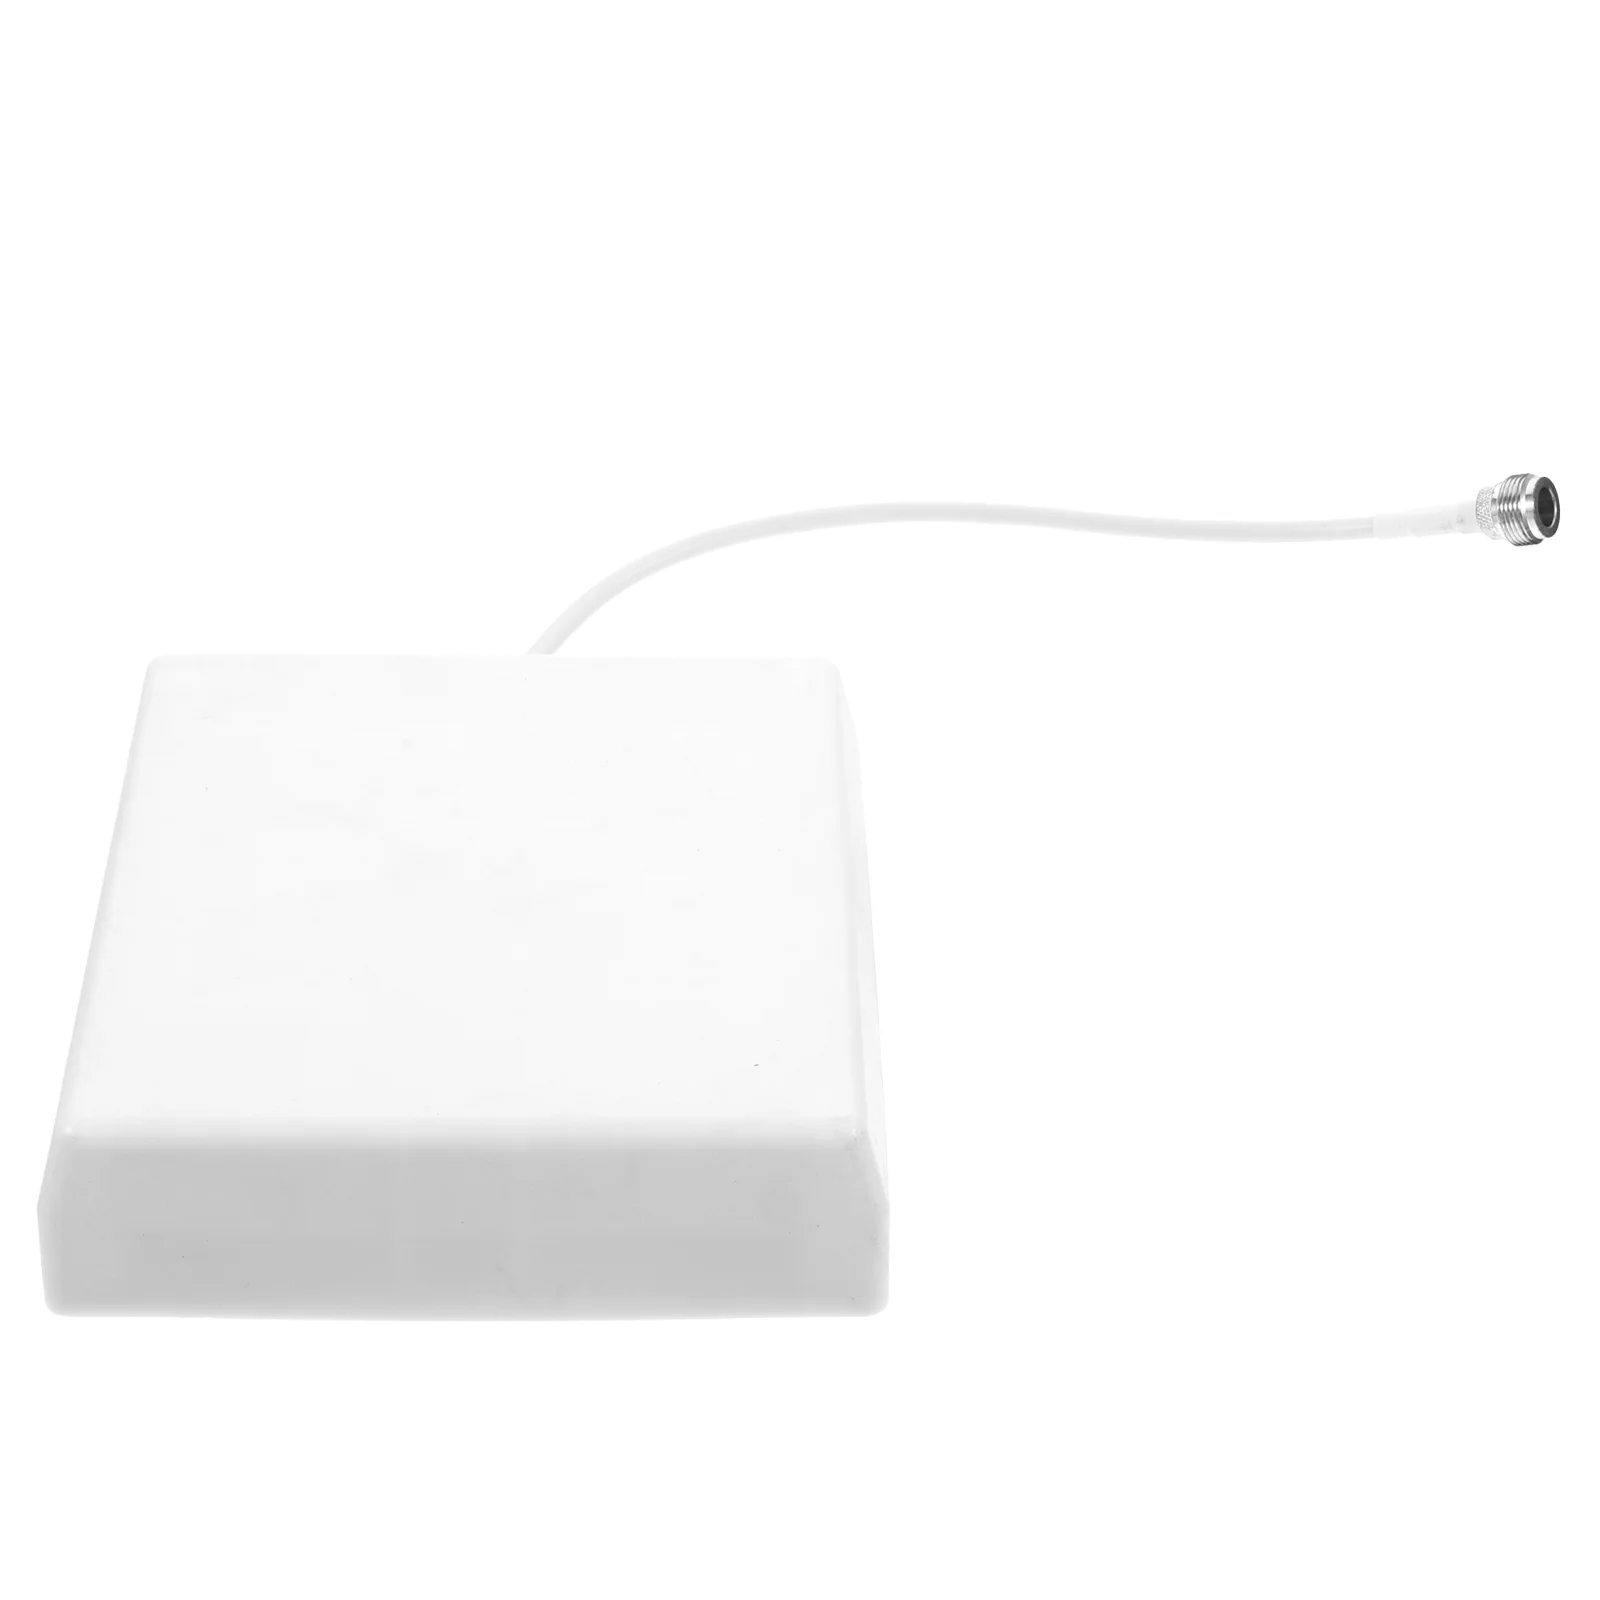 

Indoor Directional Internal Wall Mount Panel Antenna Home Cell Phone Signal Booster 1710--2700MHz CDMA/GSM/24G/3G